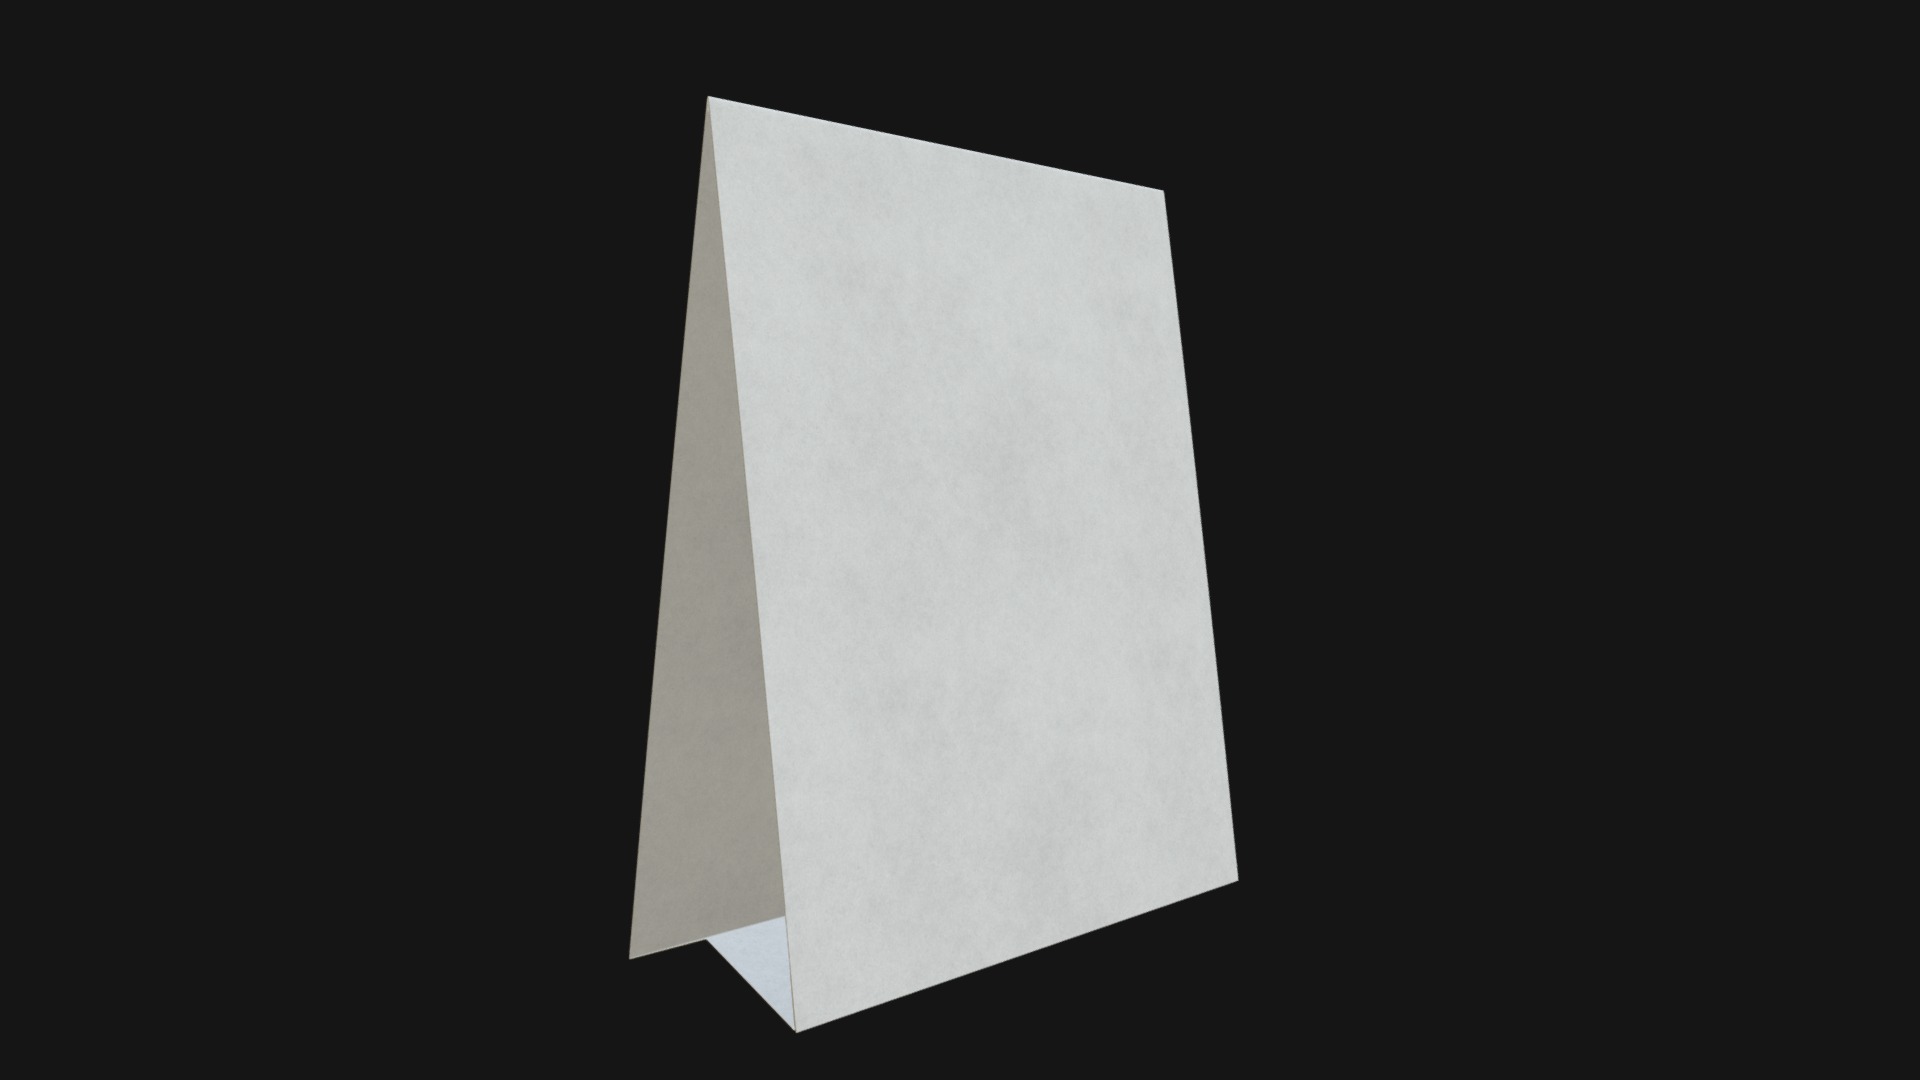 3D model Table tent template 1 - This is a 3D model of the Table tent template 1. The 3D model is about a white square with a black background.